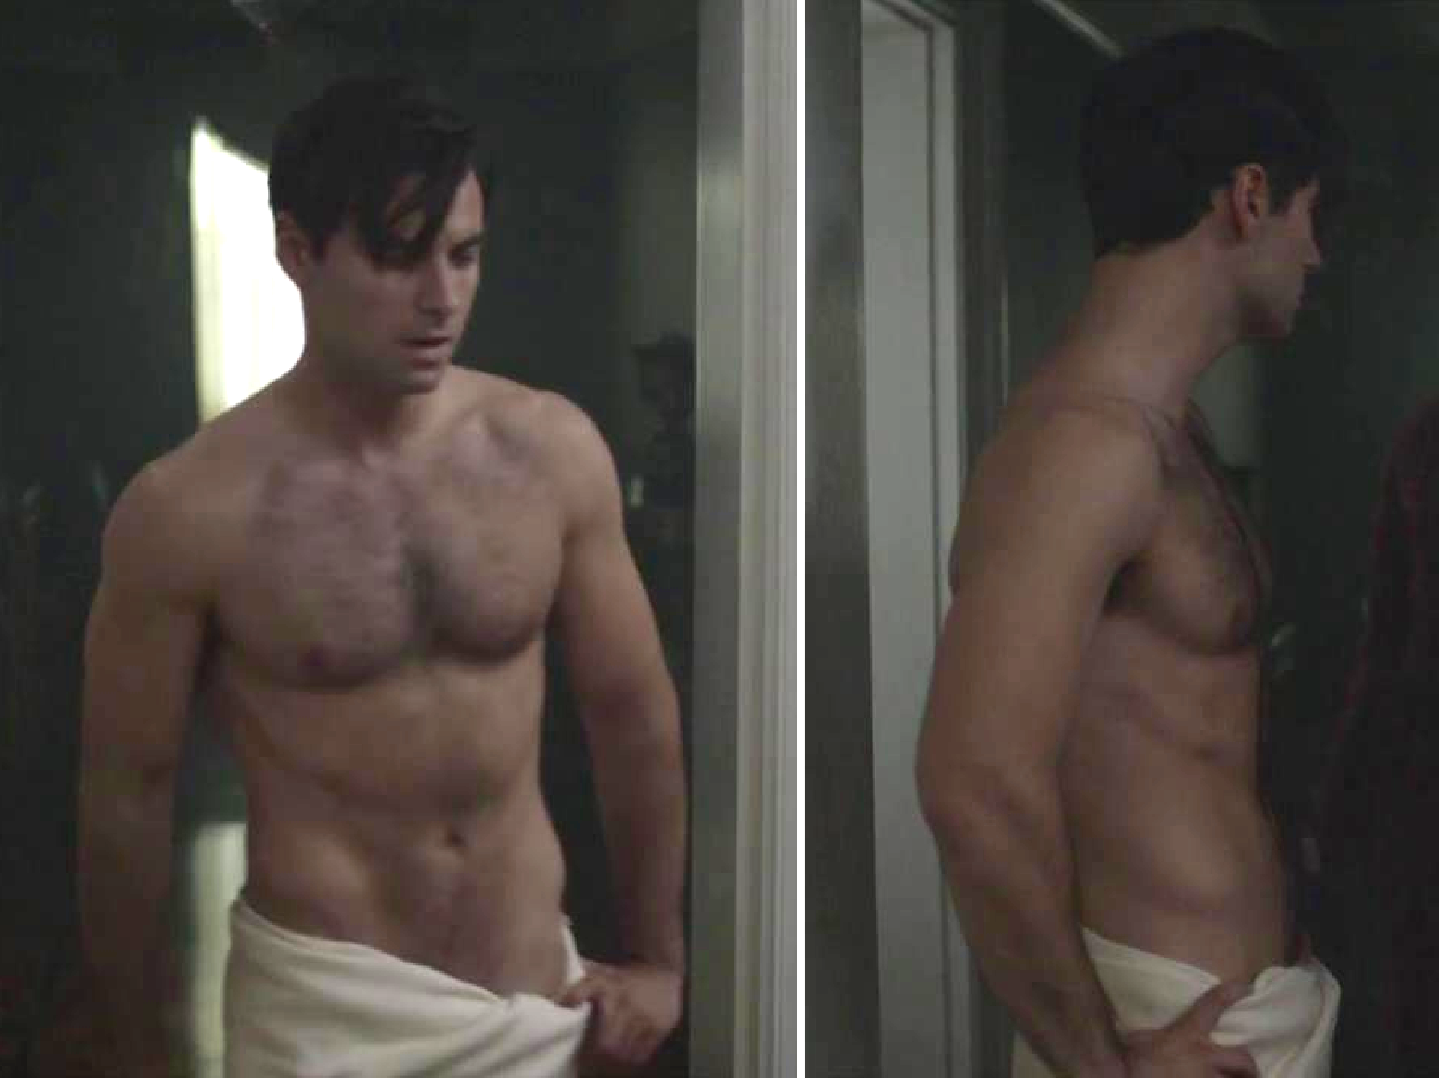 Aidan Faminoff Shirtless - The Male Fappening sorted by. relevance. 